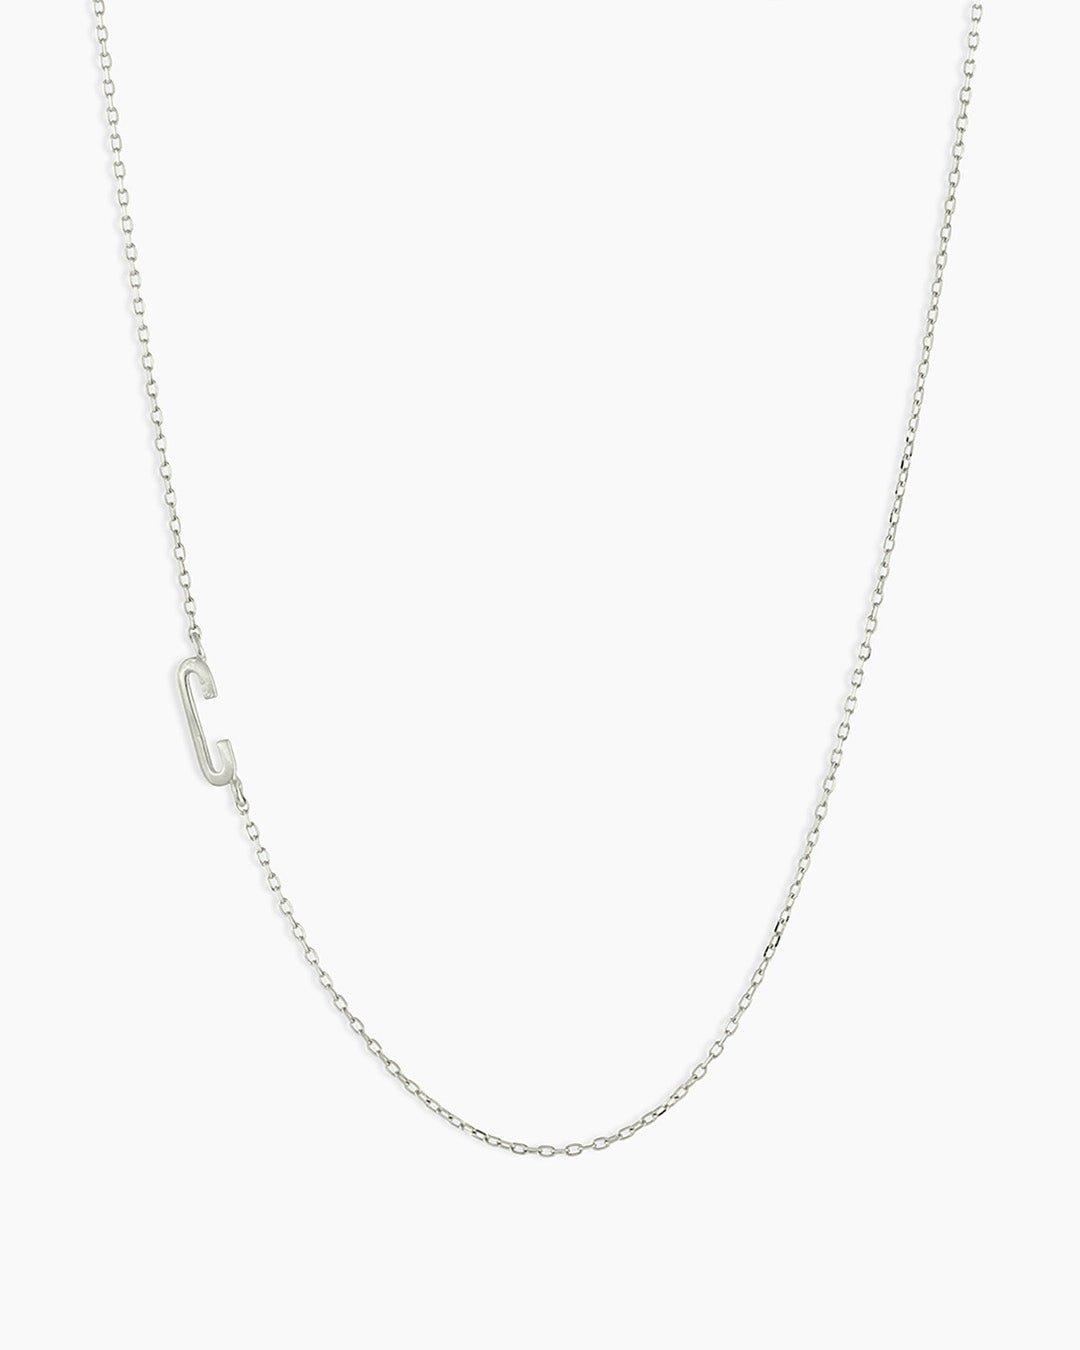 Woman wearing Alphabet Necklace || option::14k Solid White Gold, C